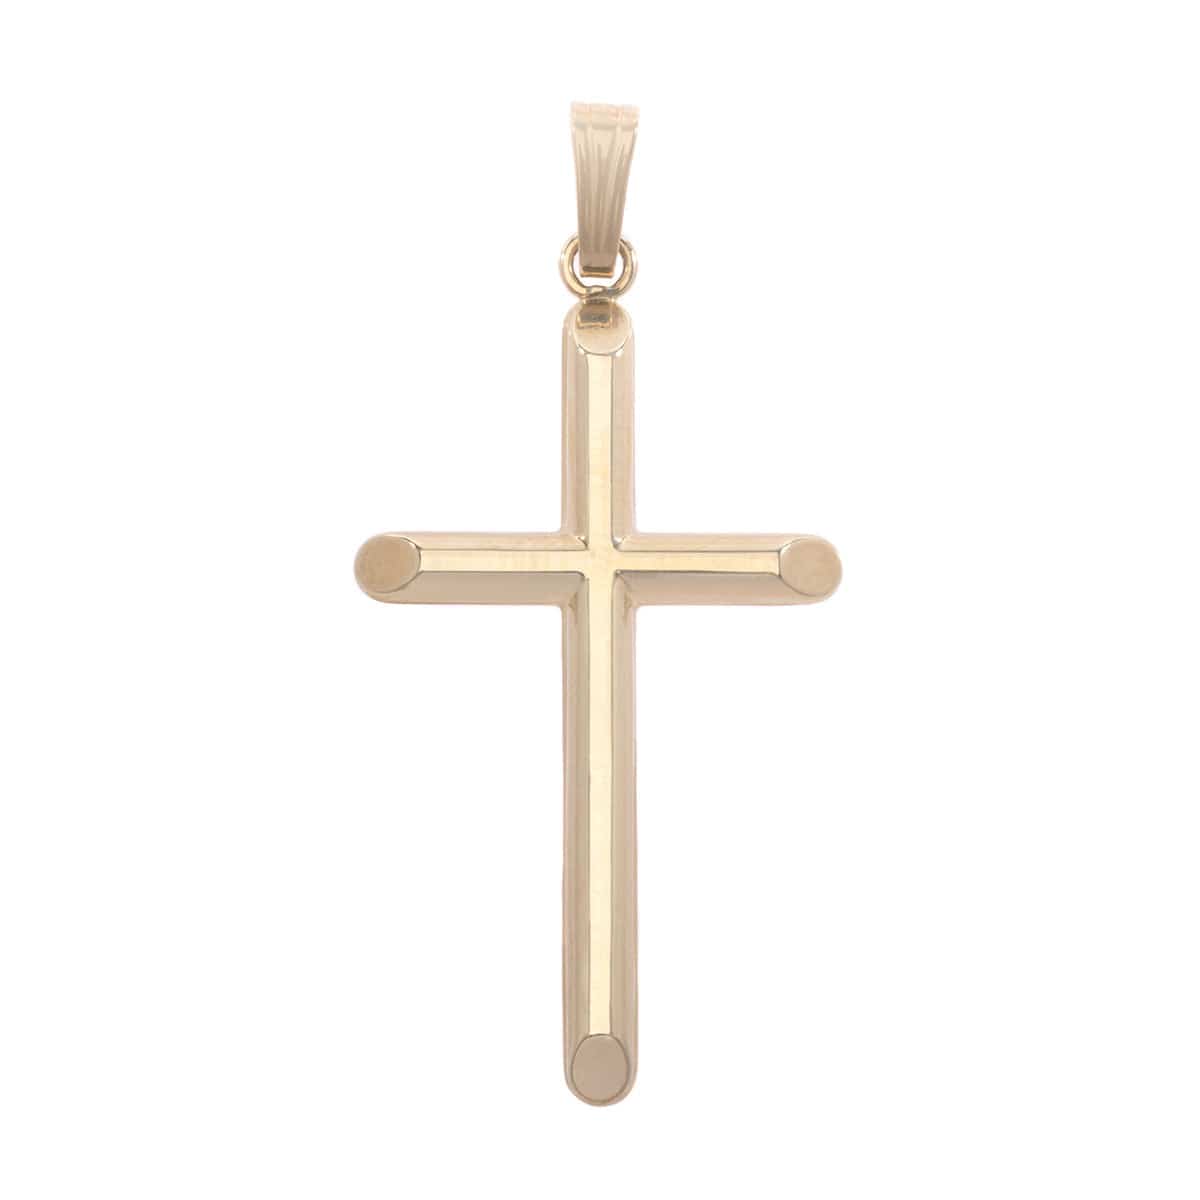 14K Yellow Gold Large Tube Cross Pendant with Beveled Ends